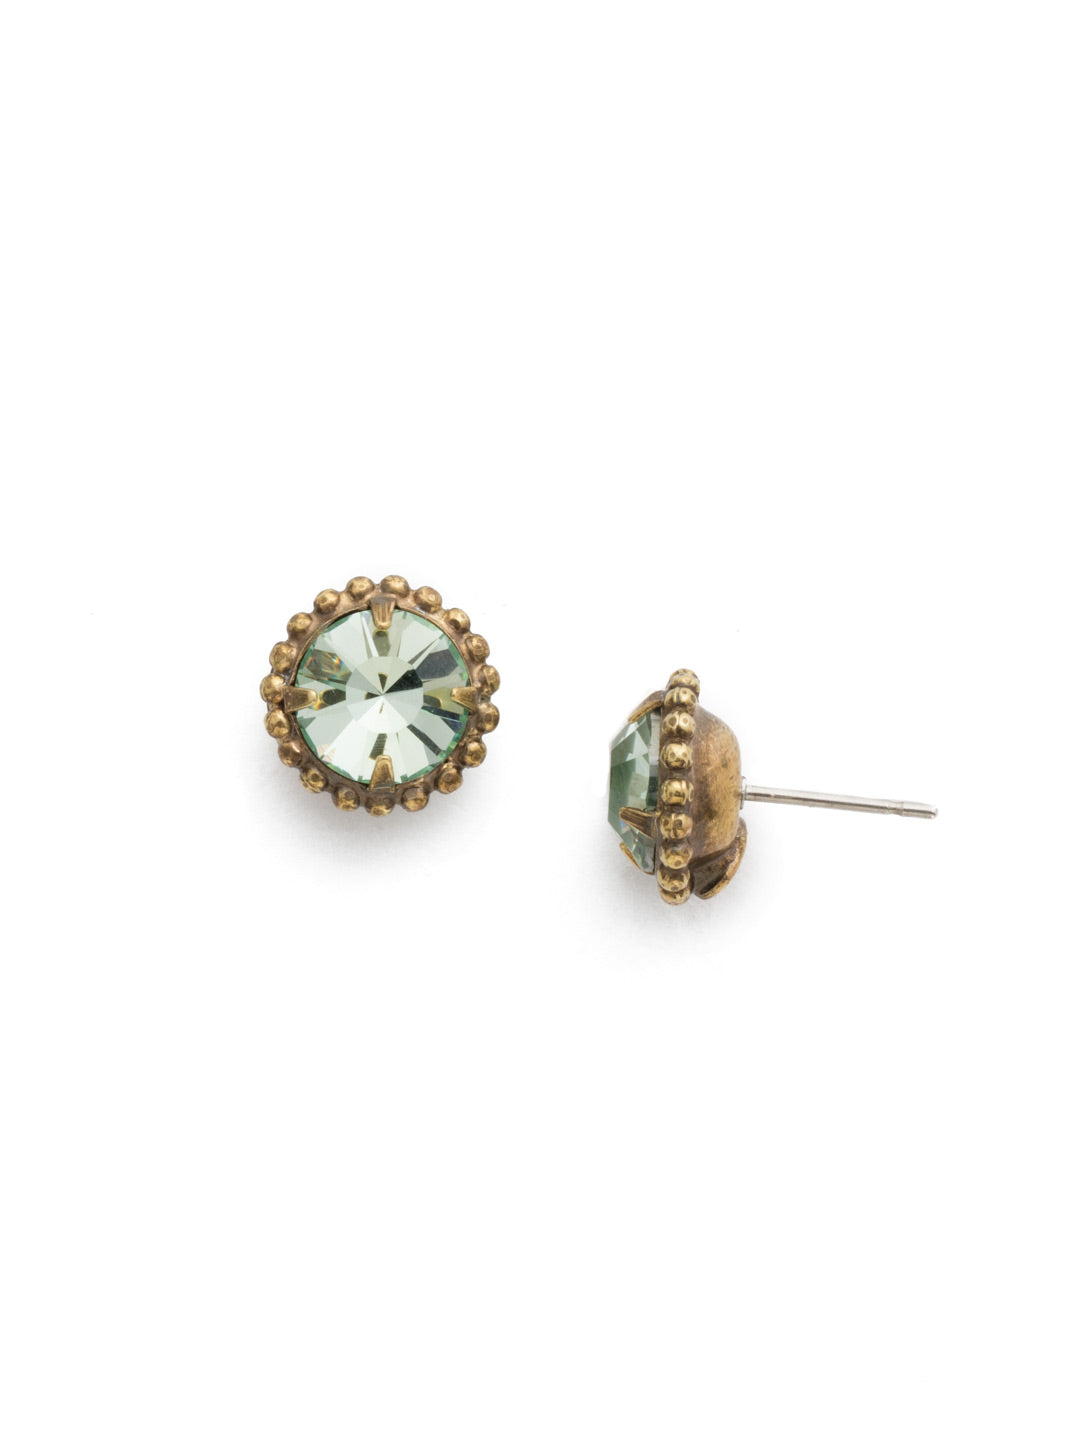 Product Image: Simplicity Stud Earrings